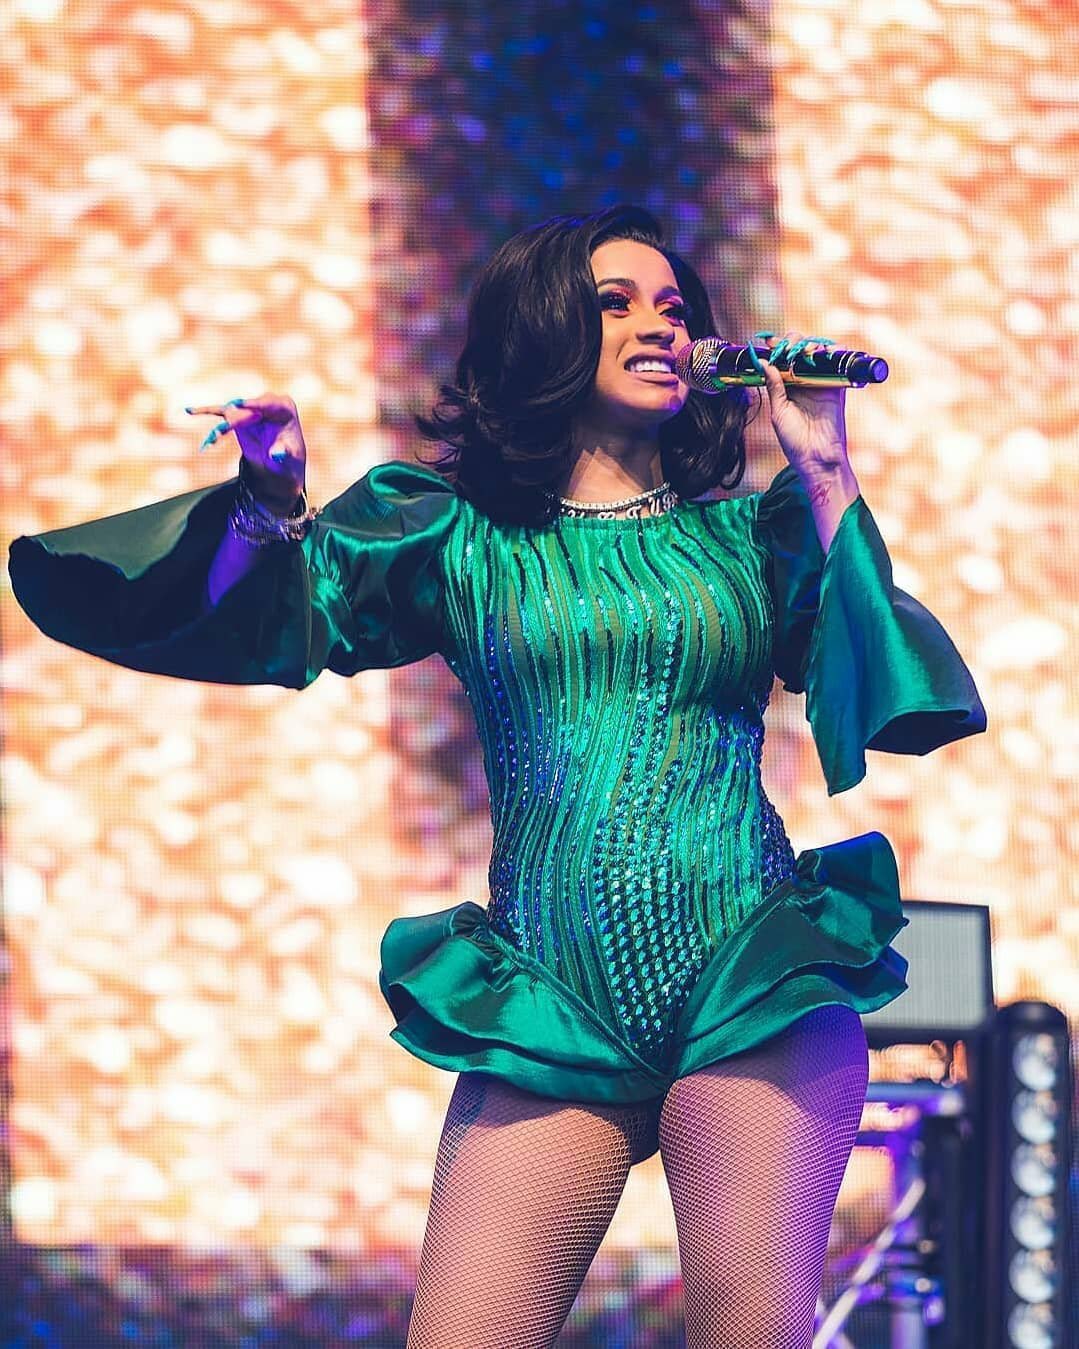 Cardi B On This Day on X: "Cardi B performing at Bay Dreams Festival in New  Zealand (January 2nd, 2019). https://t.co/XCUaApqQ5E" / X